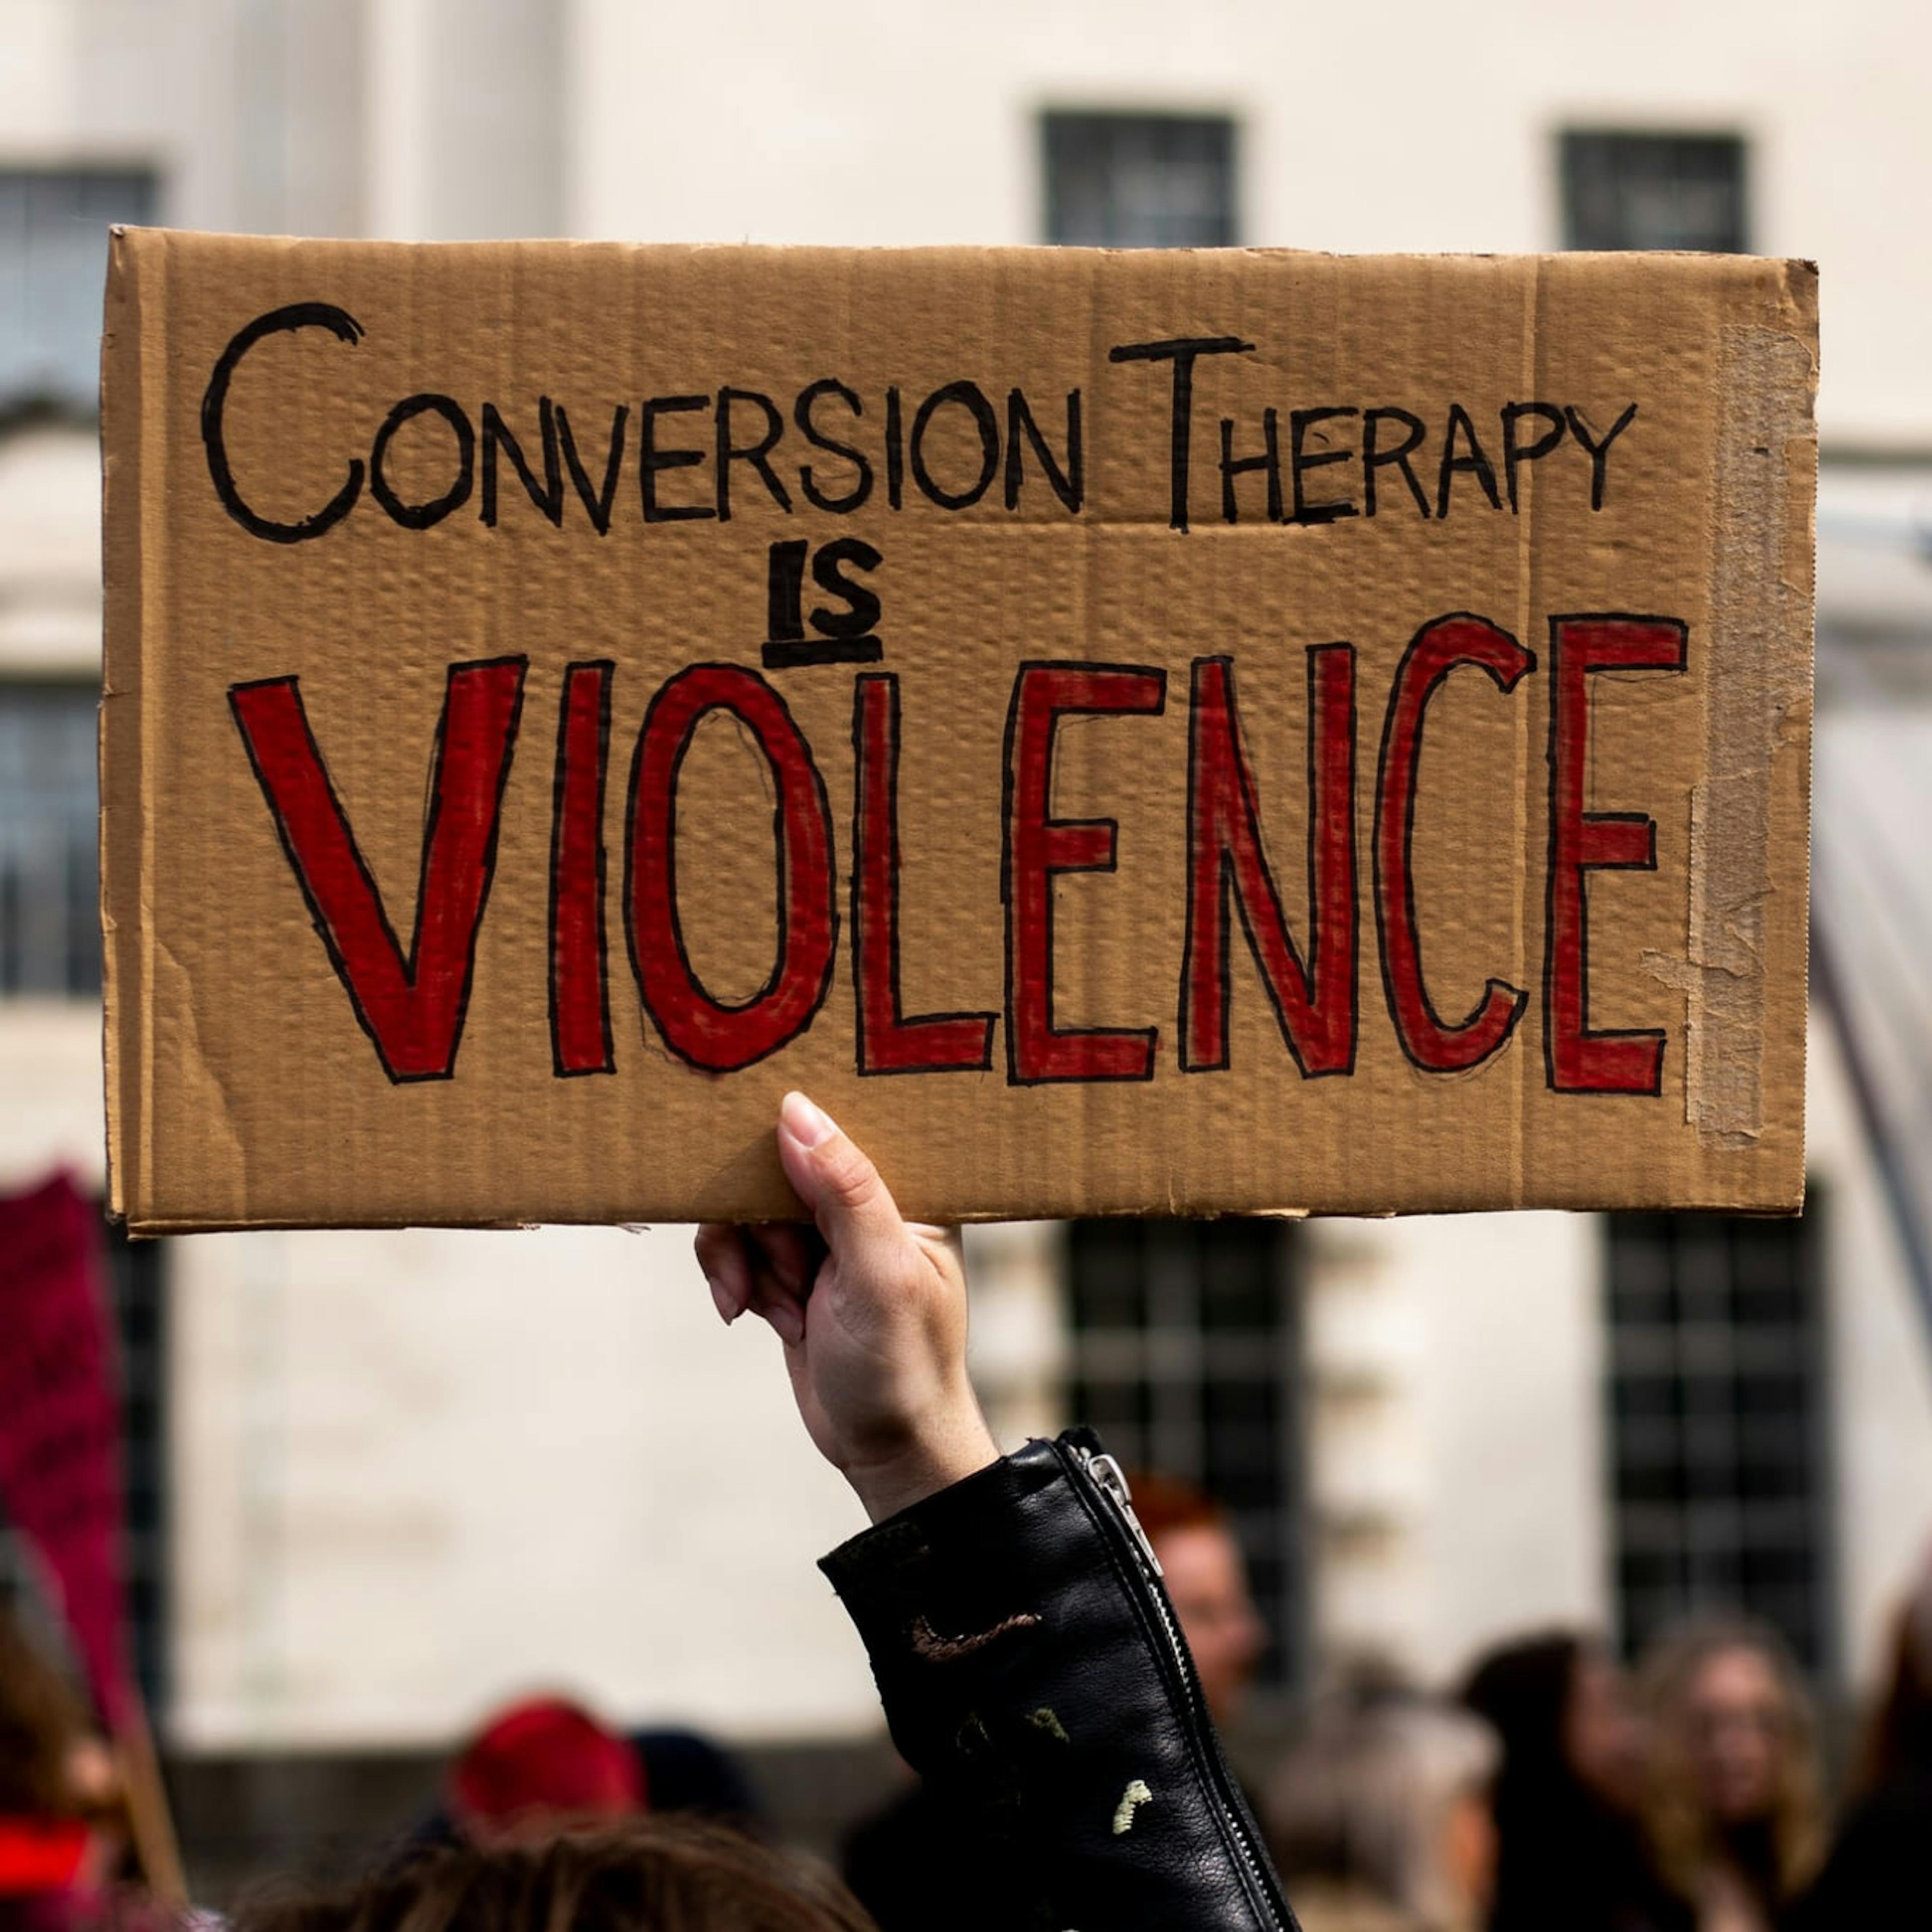 A protester holds a sign stating "conversion therapy is violence".